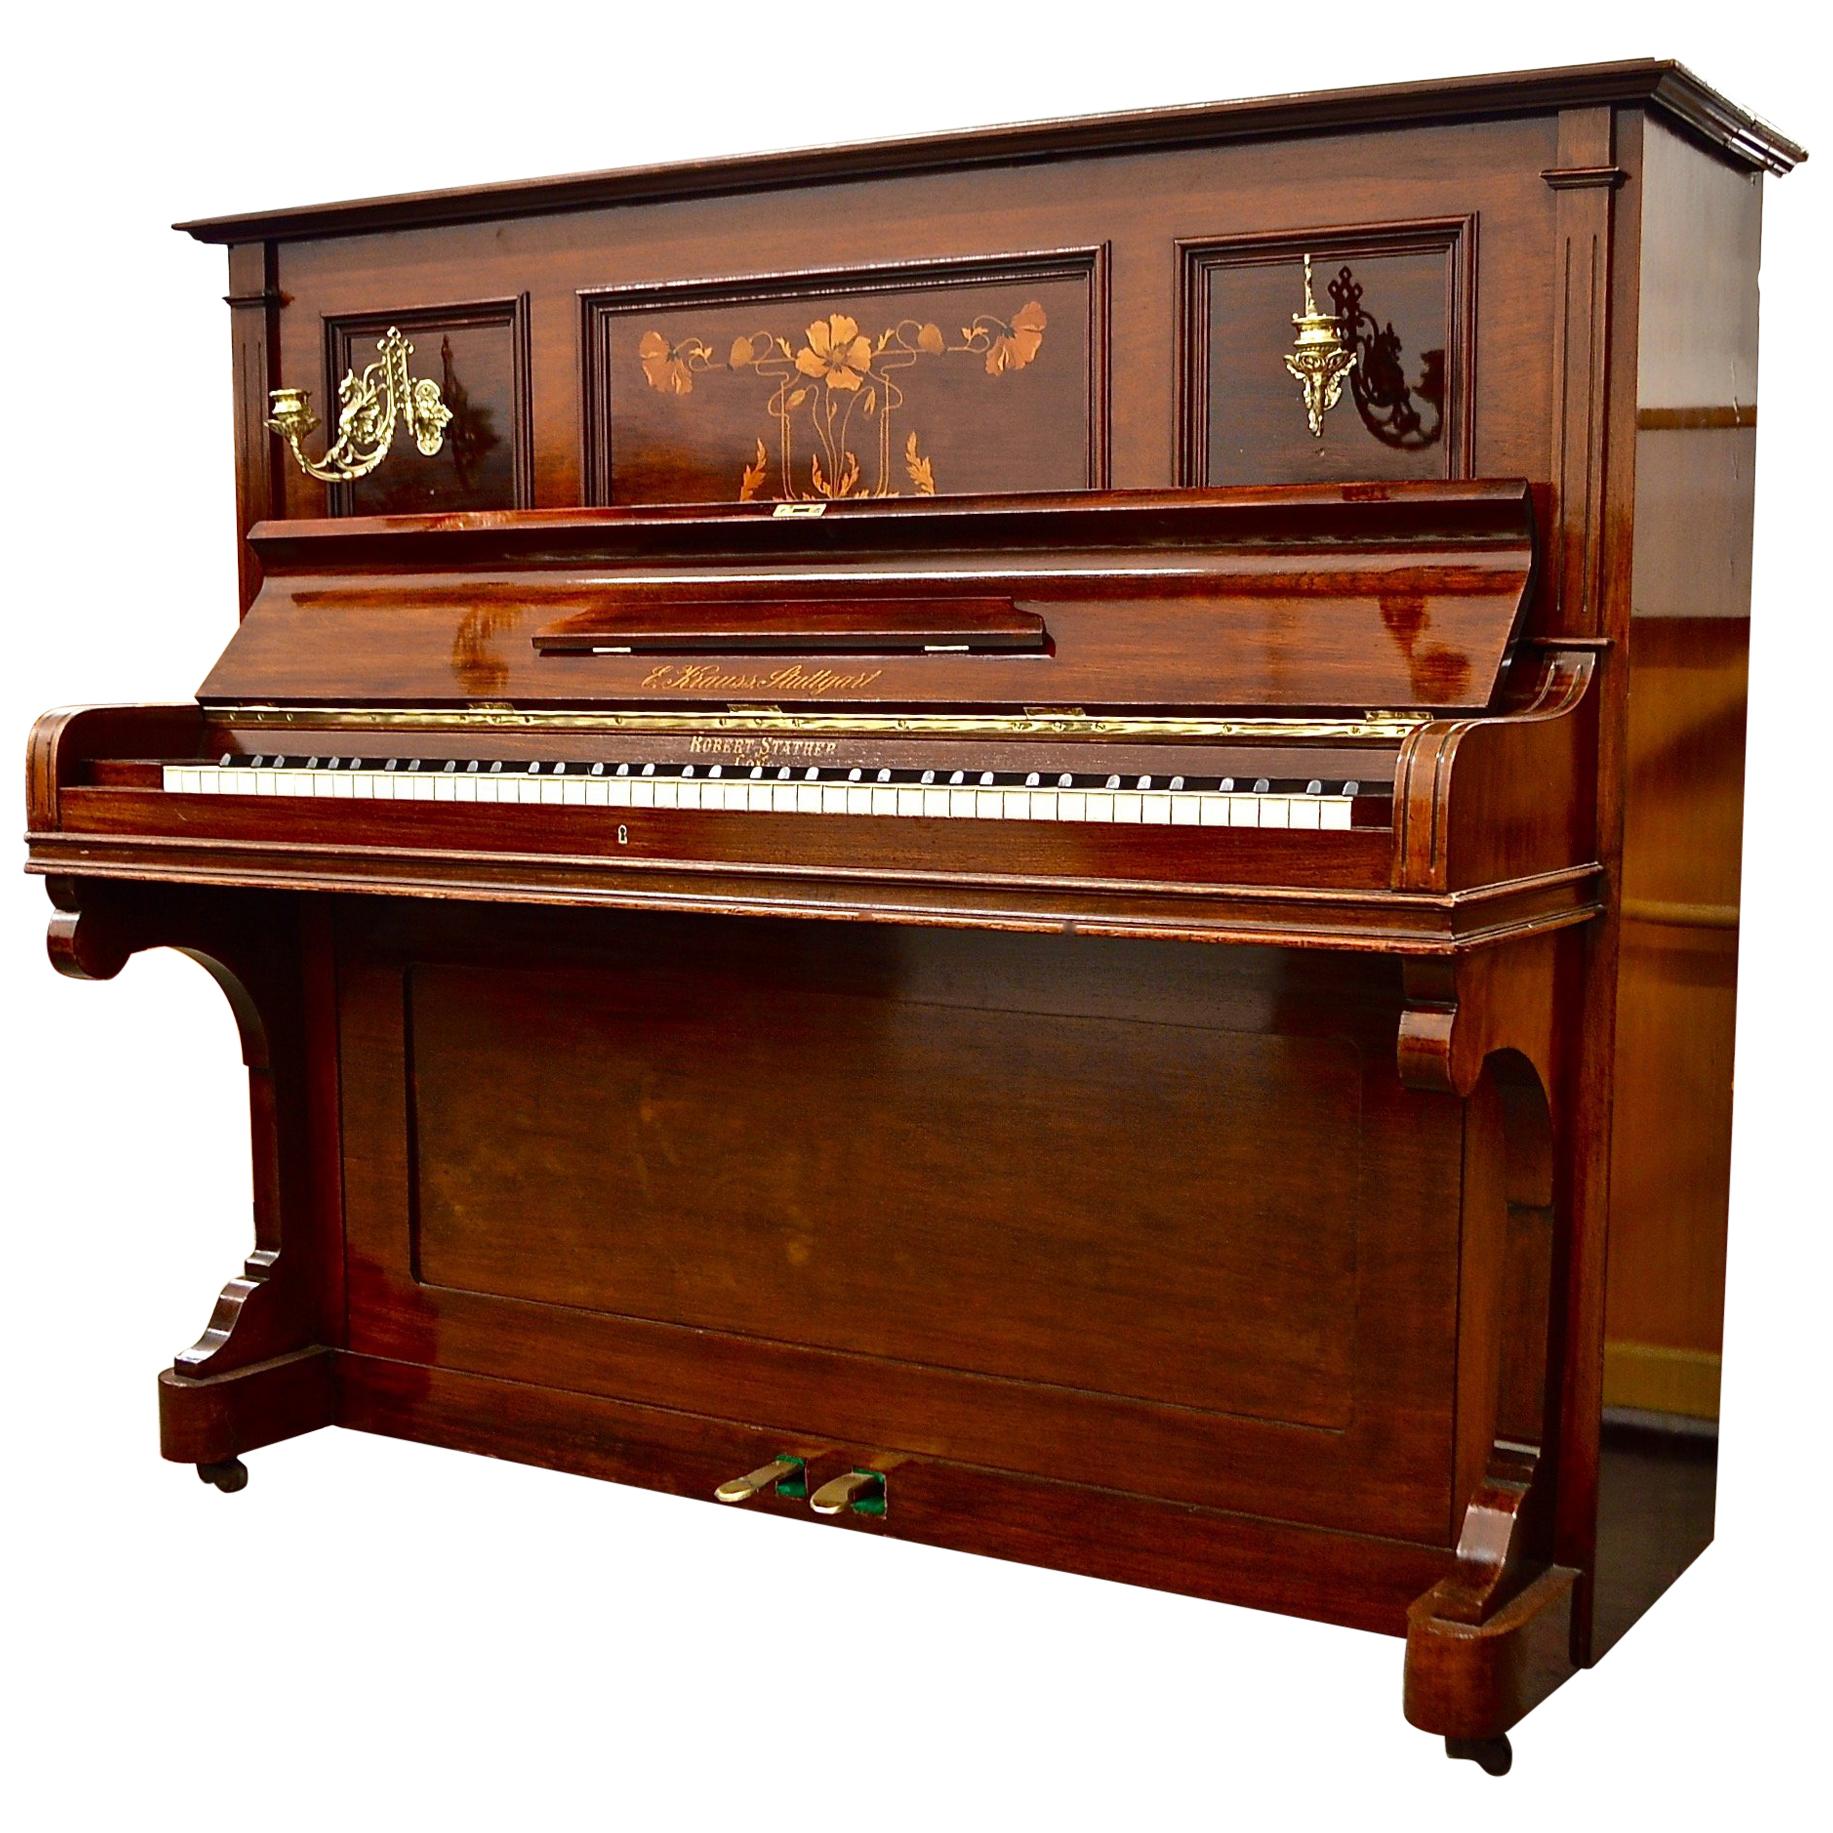 German Made Knauss Piano with Inlaid Rosewood Cabinet and Candelabra